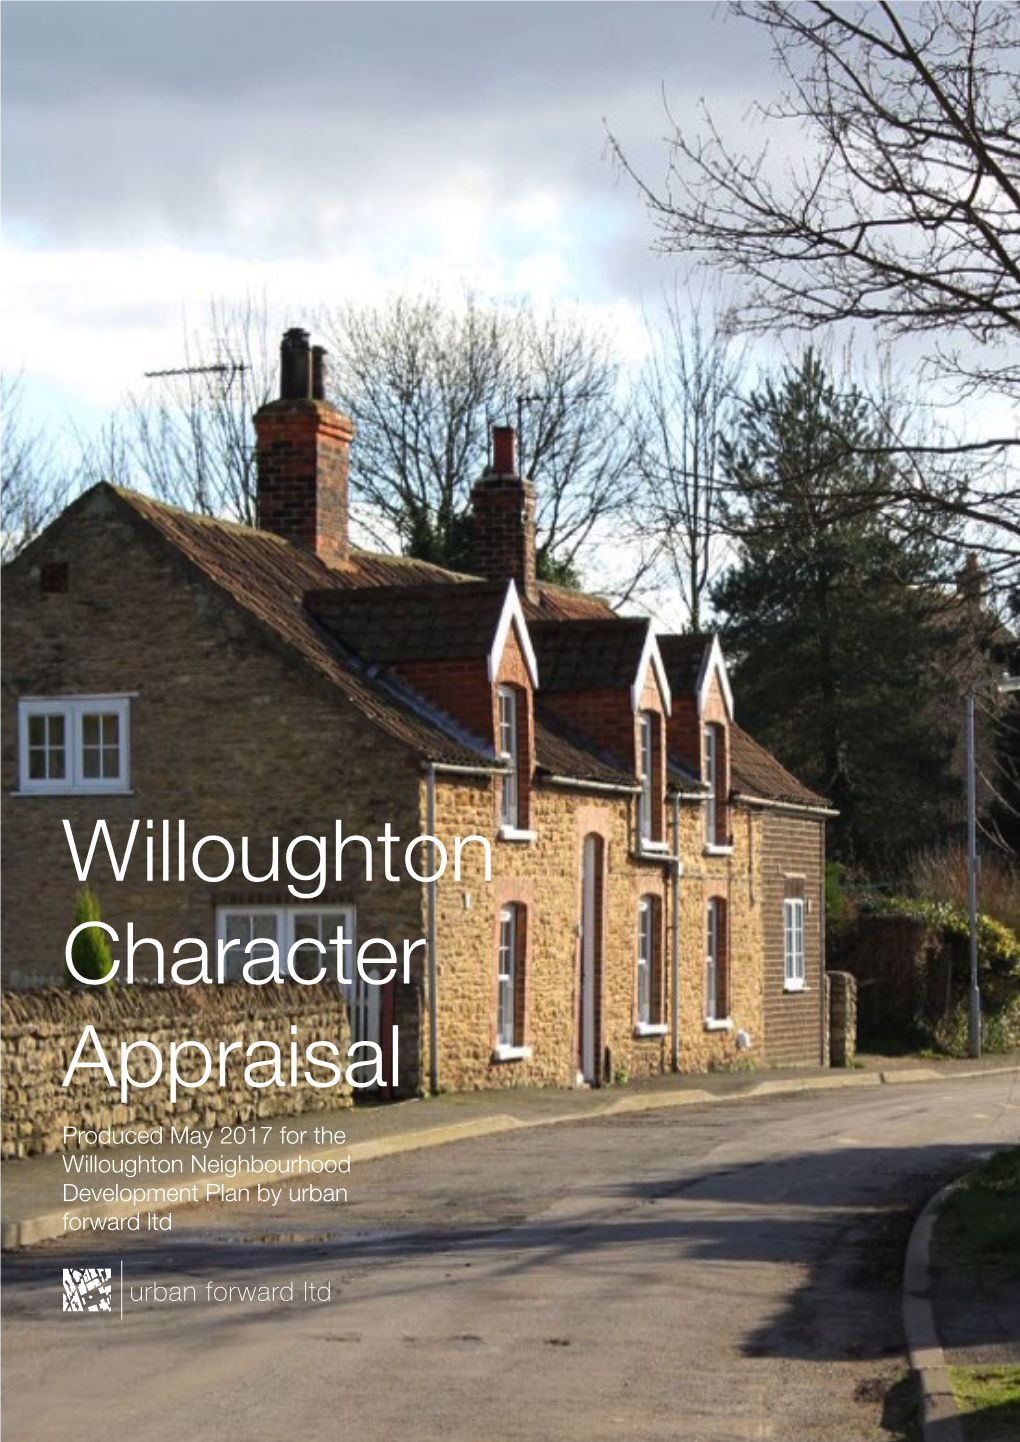 Willoughton Character Appraisal Produced May 2017 for the Willoughton Neighbourhood Development Plan by Urban Forward Ltd